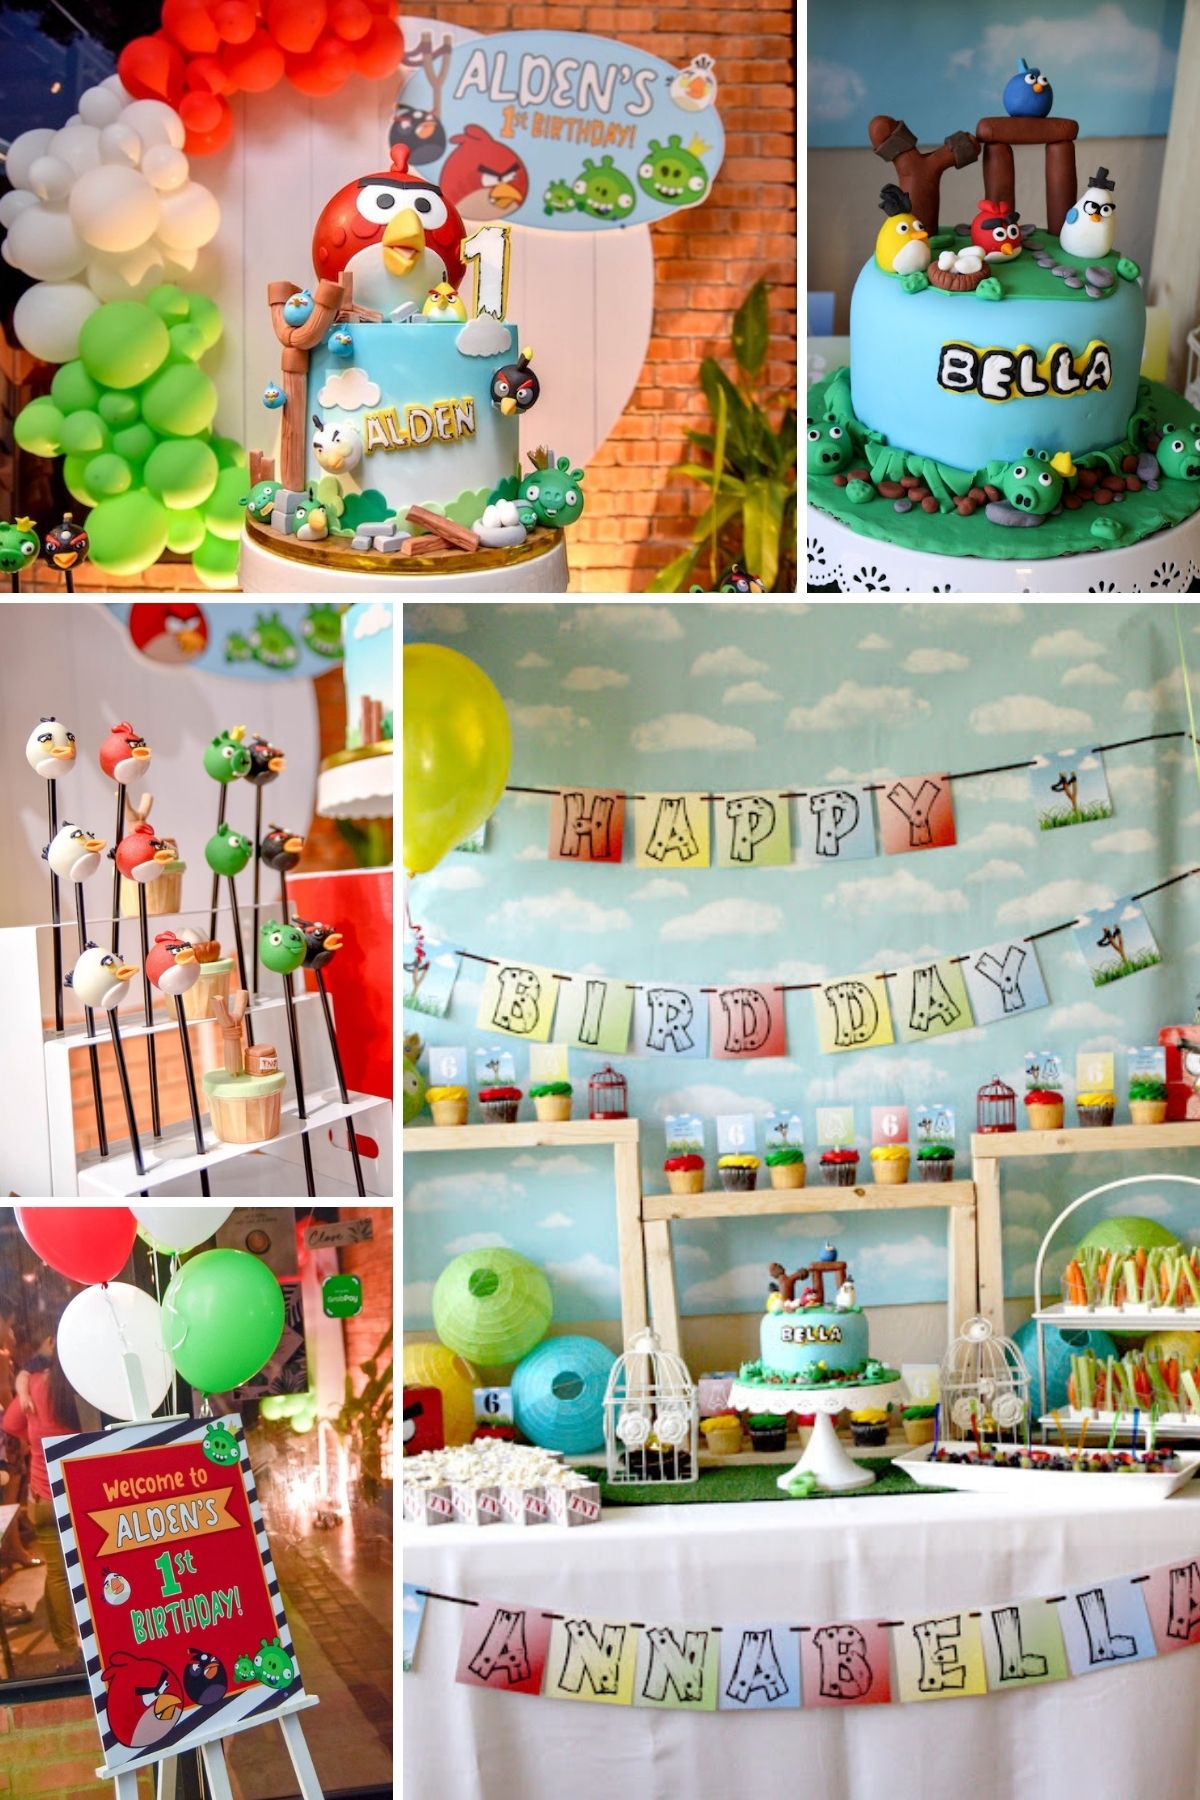 Photo collage for Angry Birds party theme including balloons, treats, and party favors.